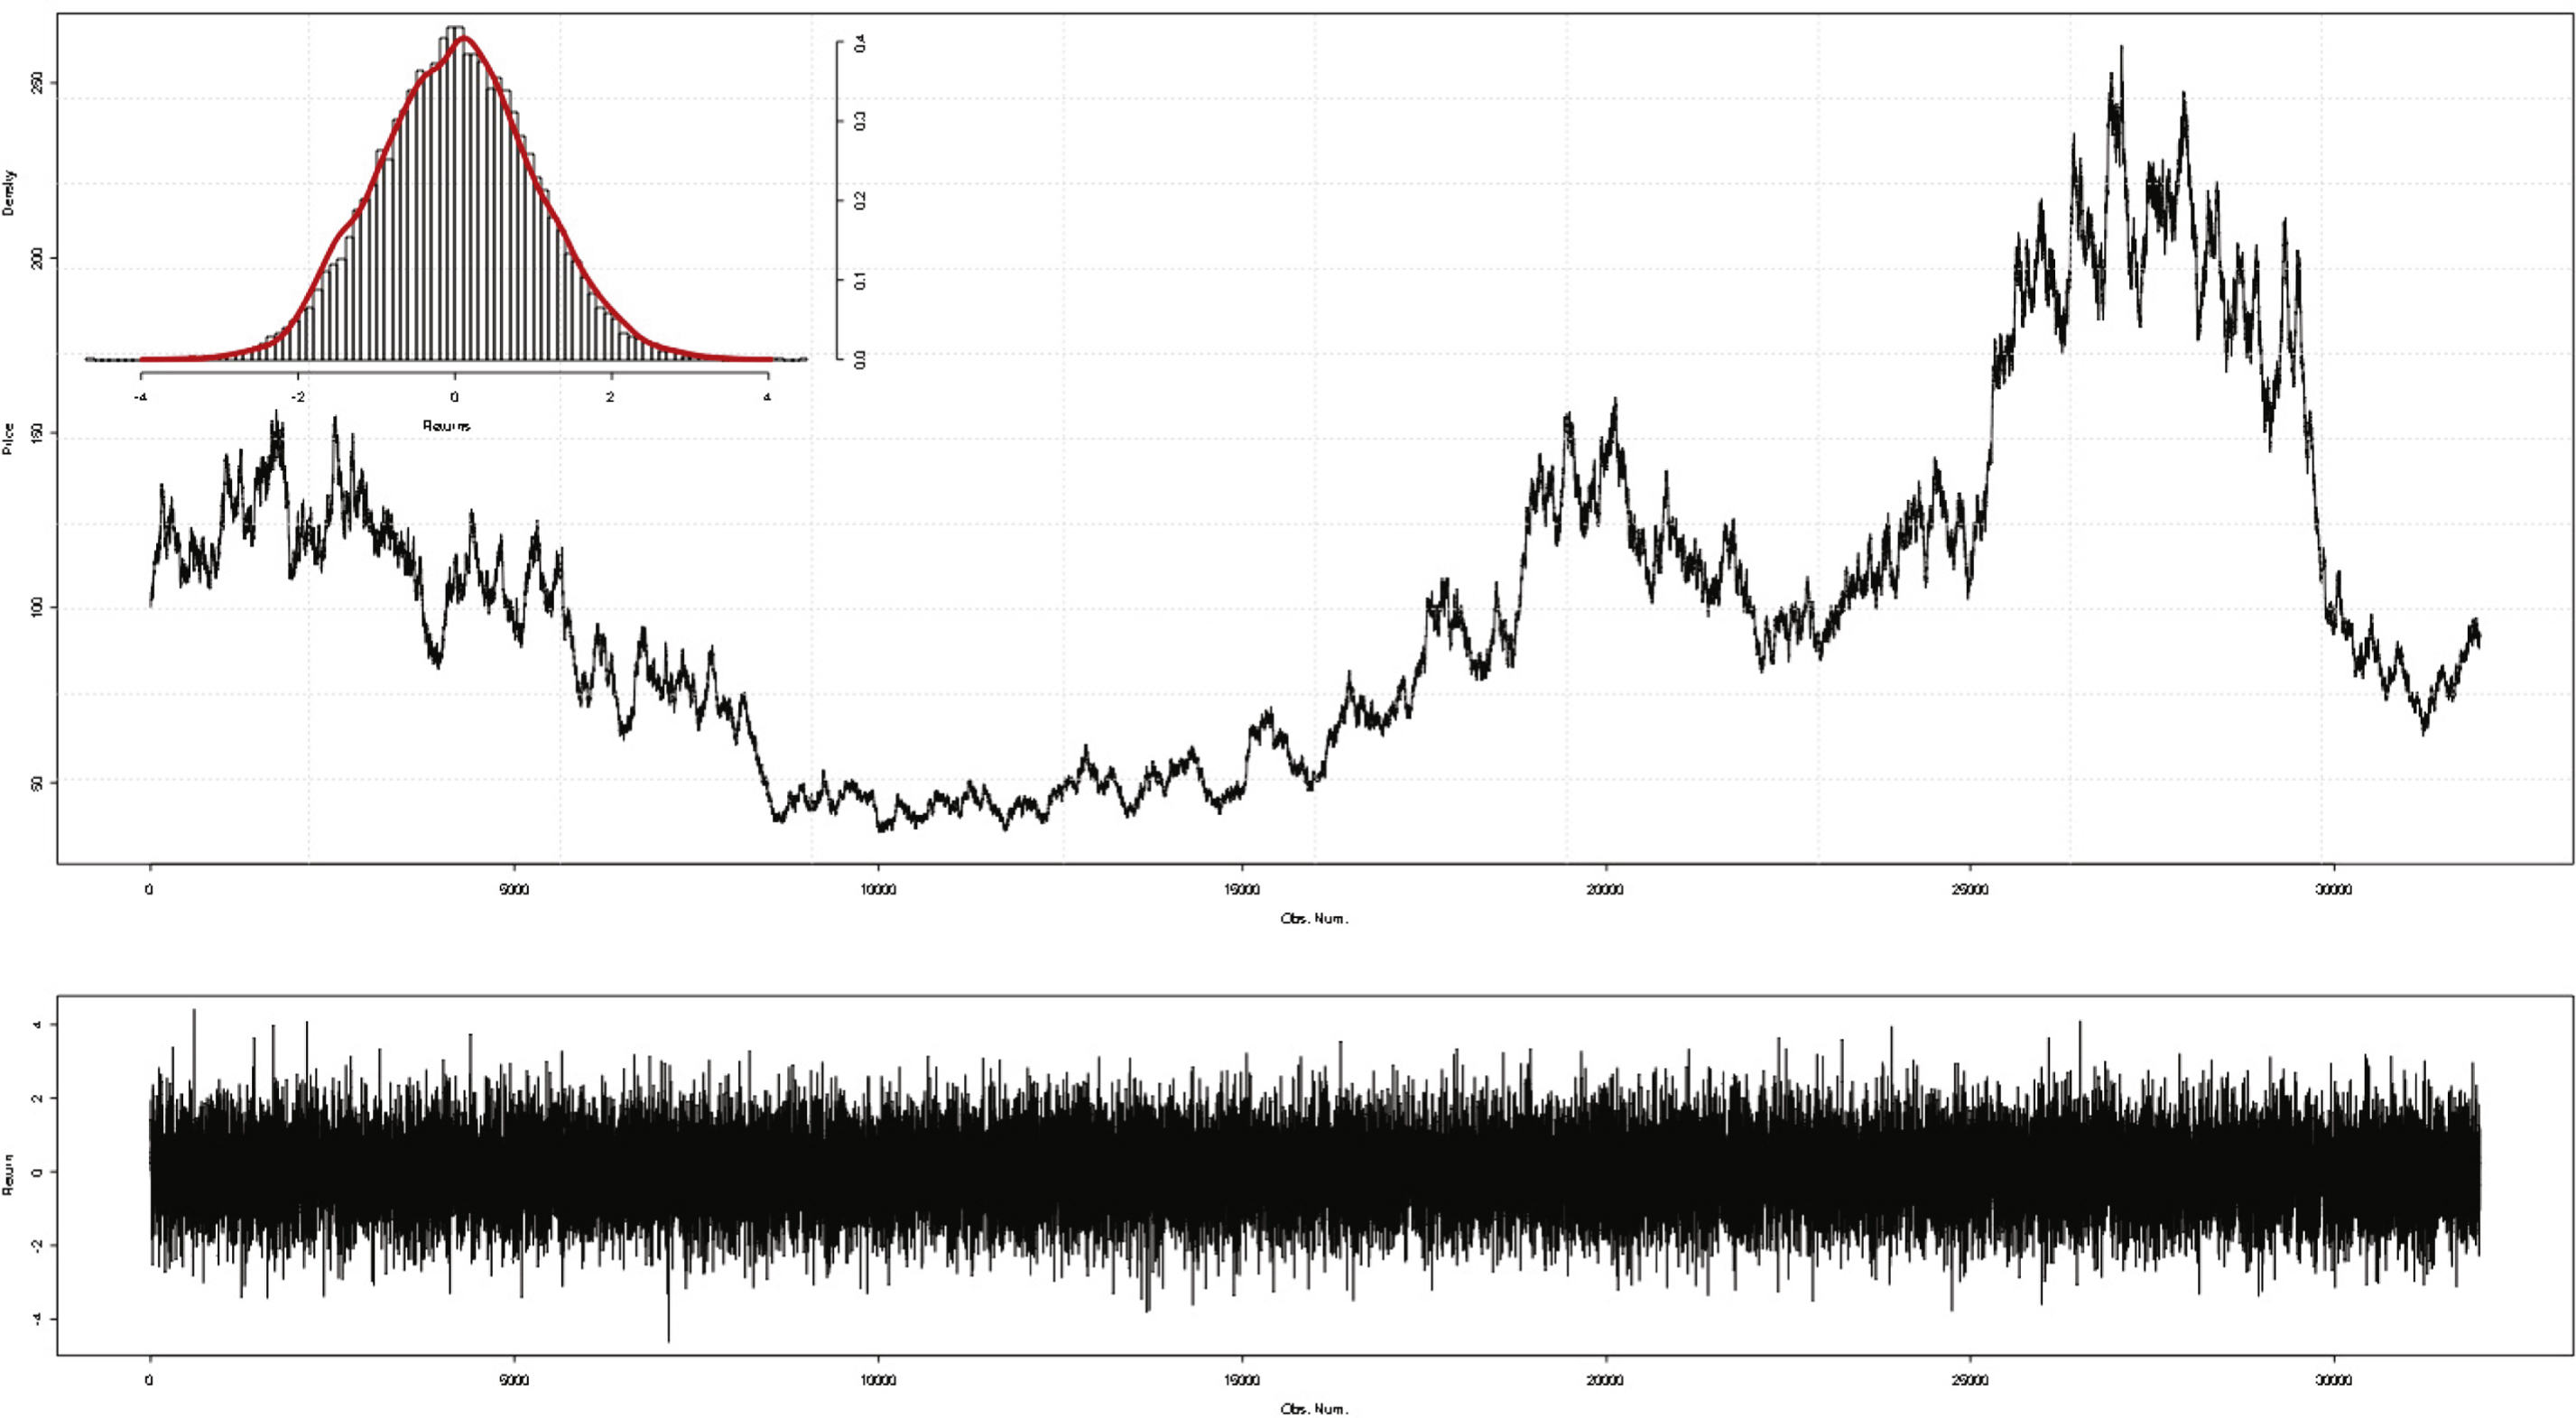 Return series simulated from the standard normal distribution and the price motion
corresponding to the simulated returns.
Top-left: histogram of simulated returns.
Middle: price sequence generated from simulated returns, with an initial price of 100.
Bottom: time series plot of simulated returns.